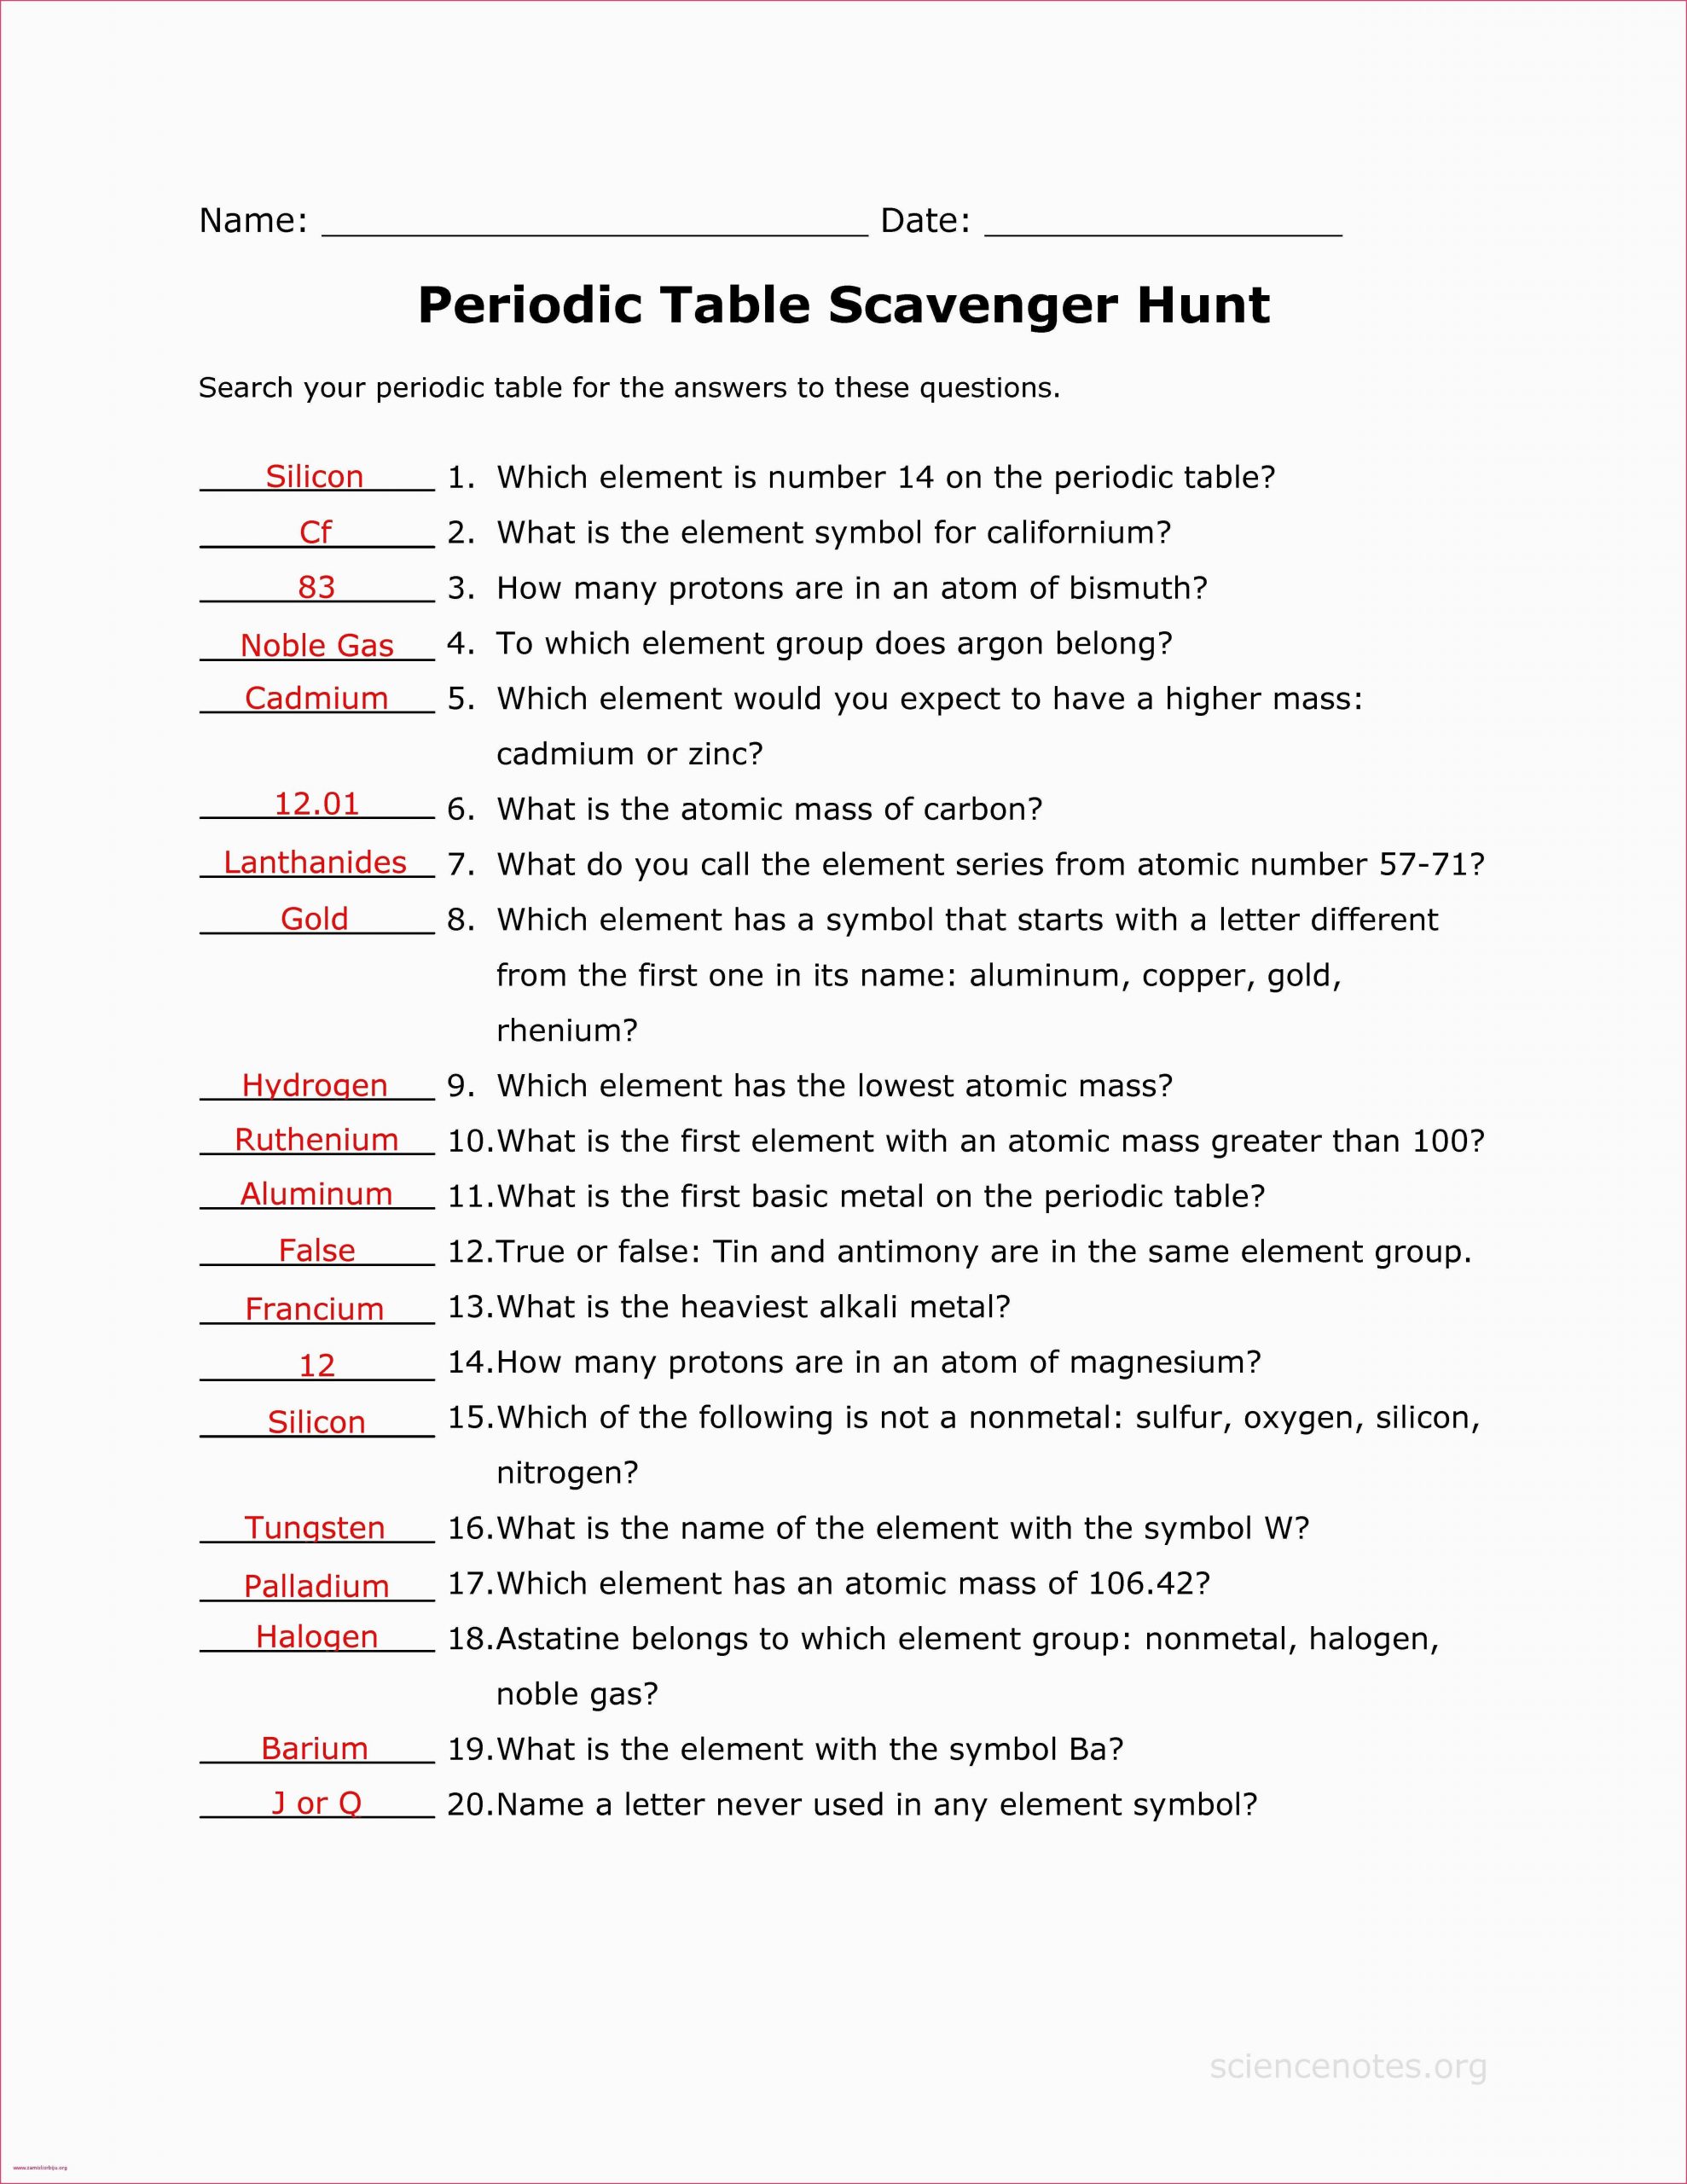 Hunting the Elements Worksheet You Can Download Best Periodic Table with Mass at Here